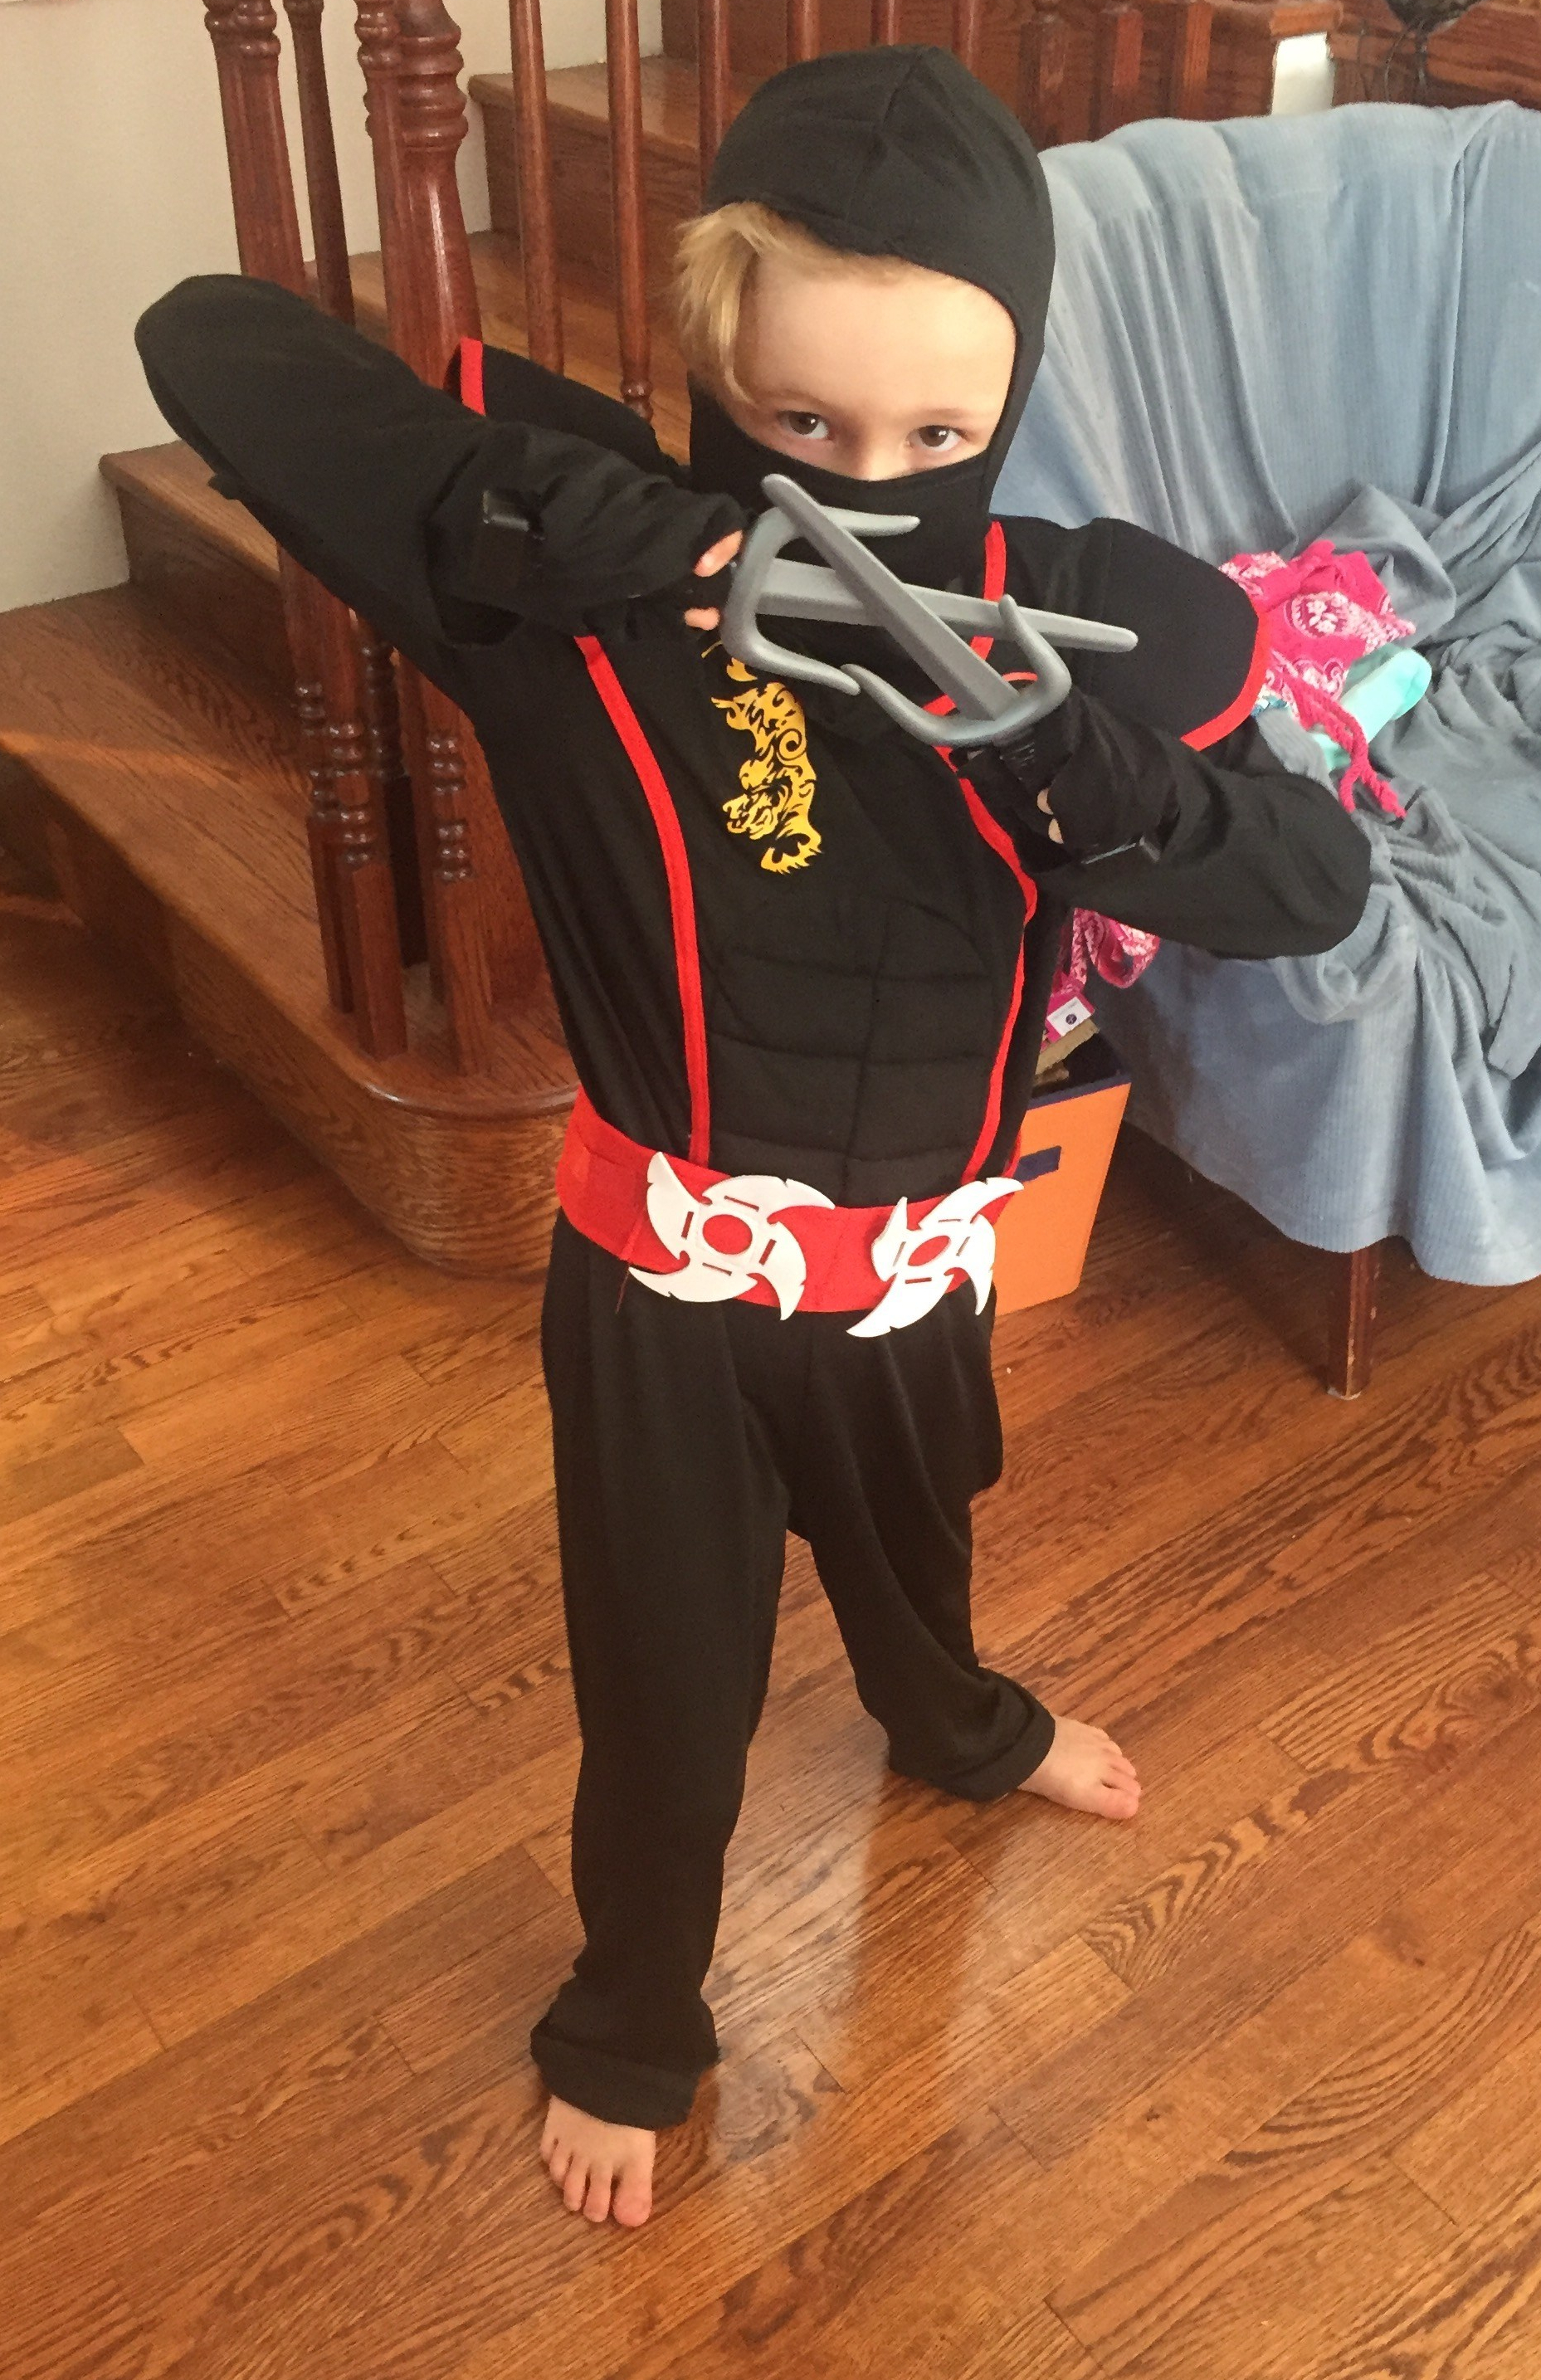 Eight year old girl dressed up in ninja costume with black face mask